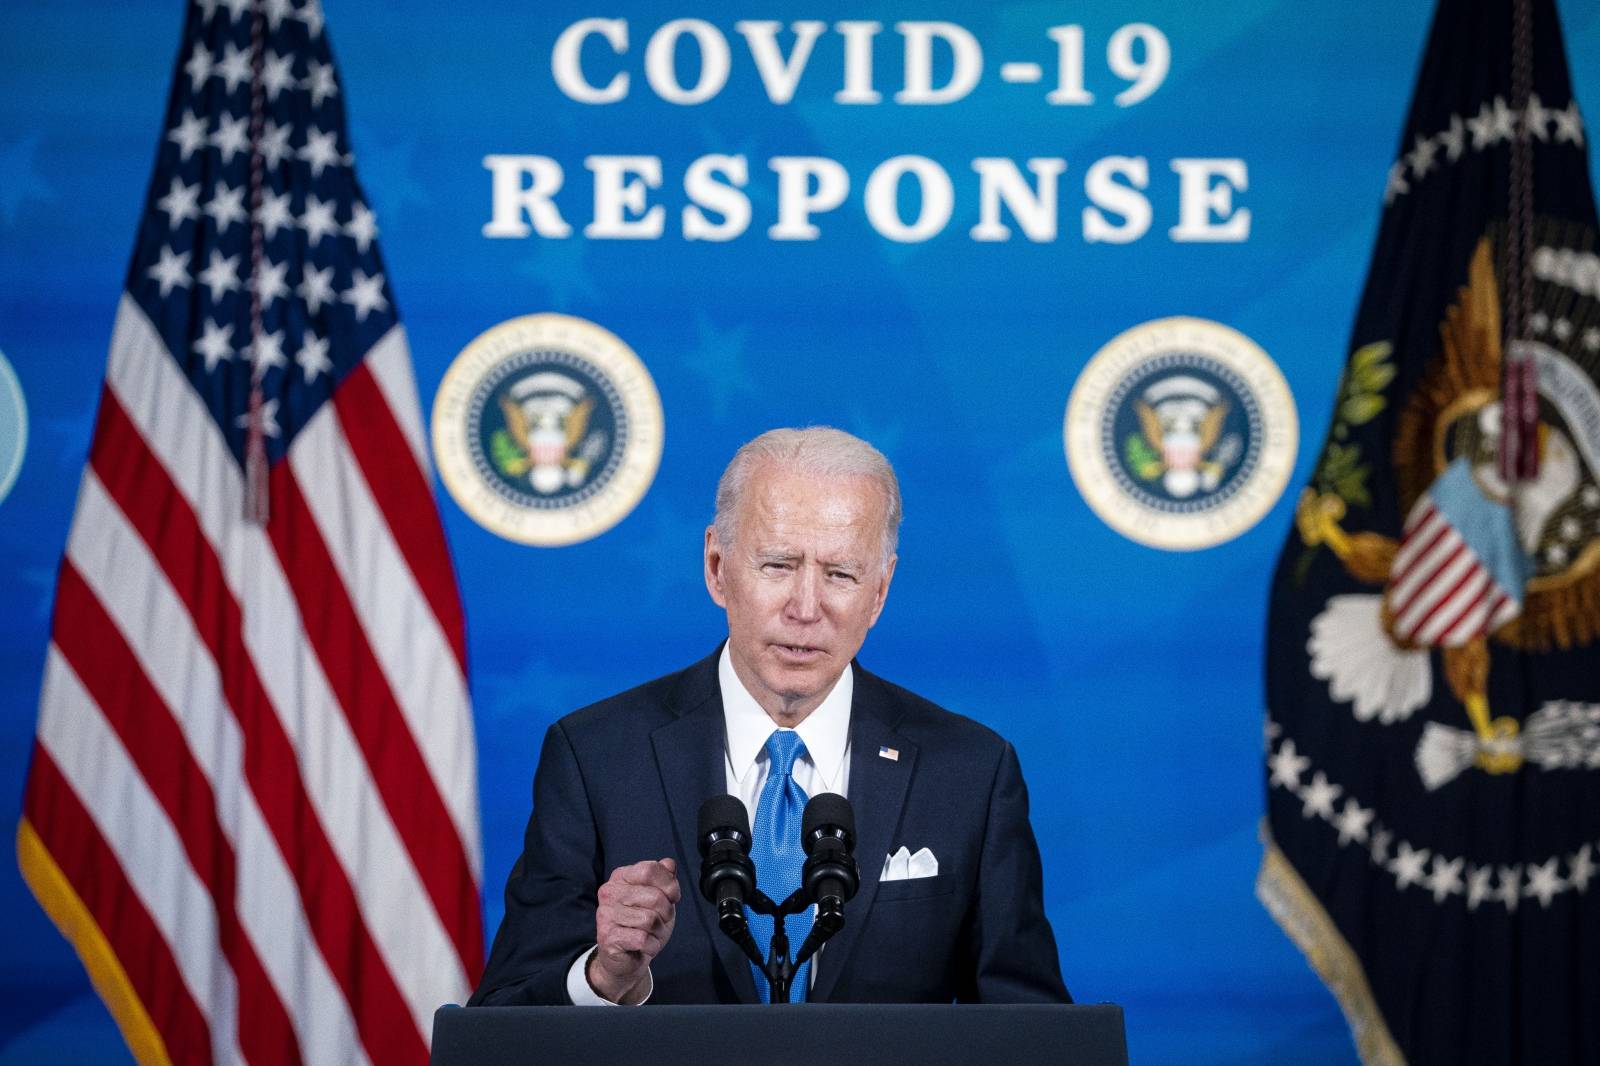 Biden Hosts an Event with the CEOs of Johnson & Johnson and Merck